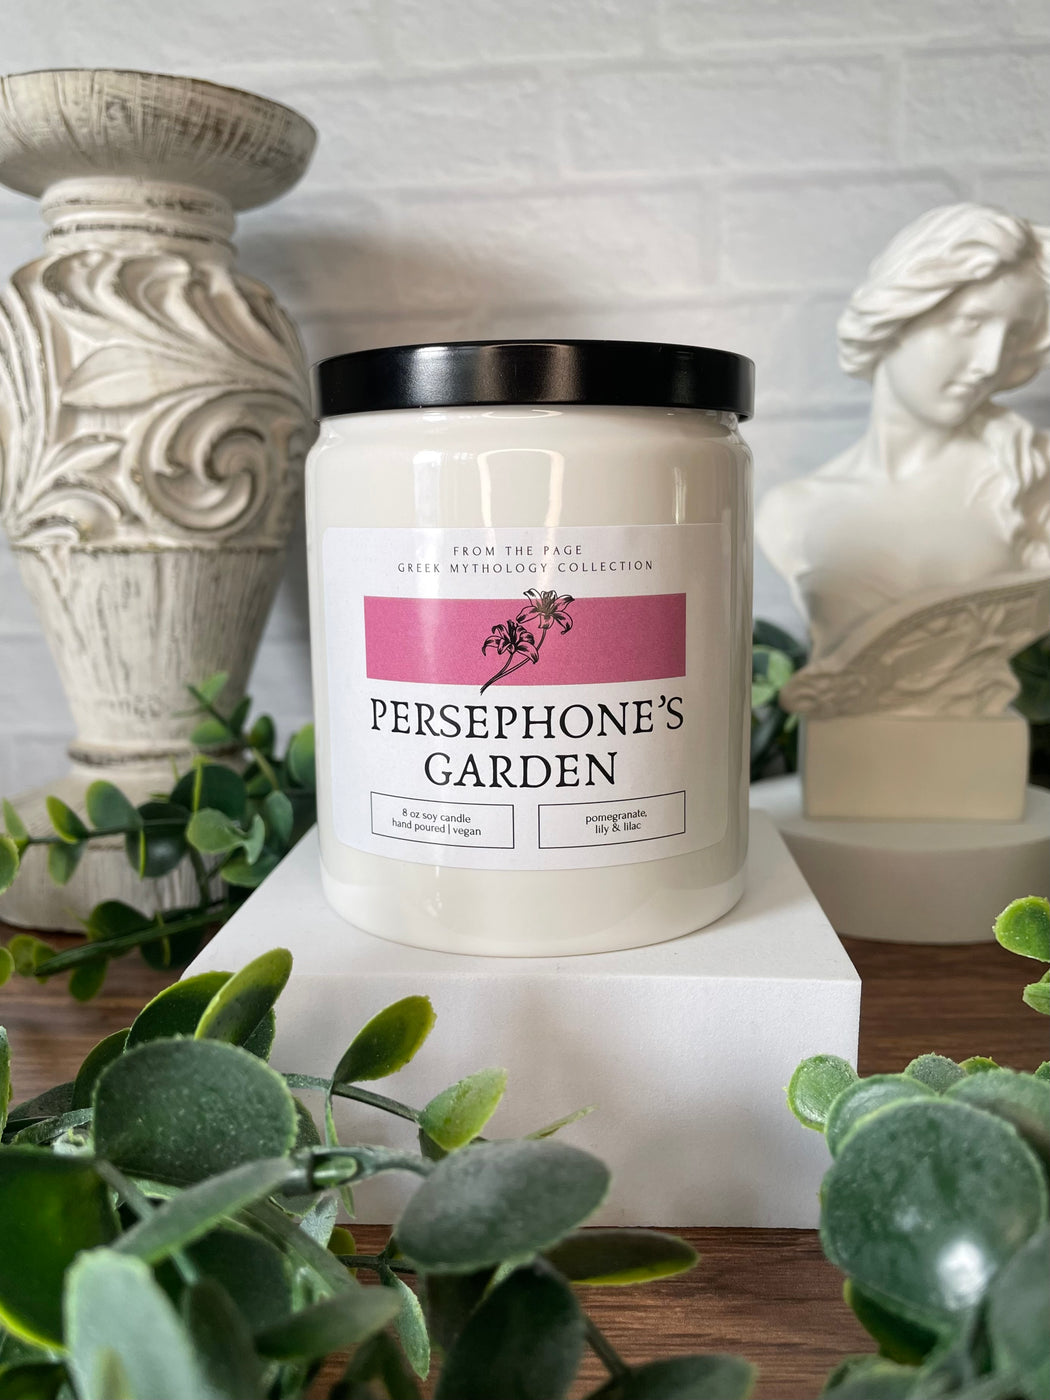 white candle with label "Persephone's Garden" and green leaves in background